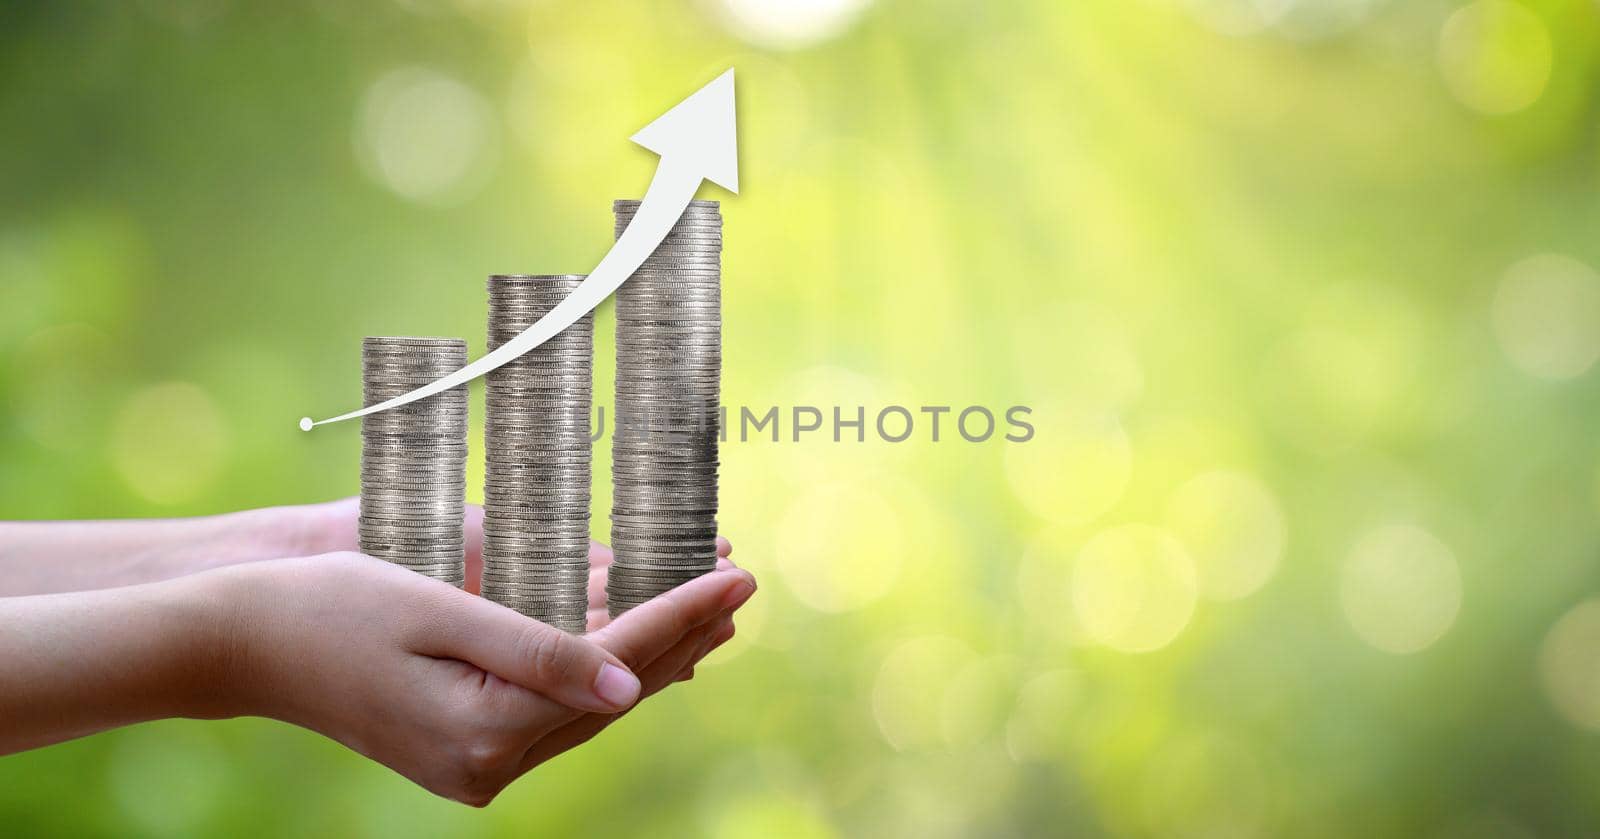 hand Coin tree The tree grows on the pile. Saving money for the future. Investment Ideas and Business Growth. Green background with bokeh sun by sarayut_thaneerat